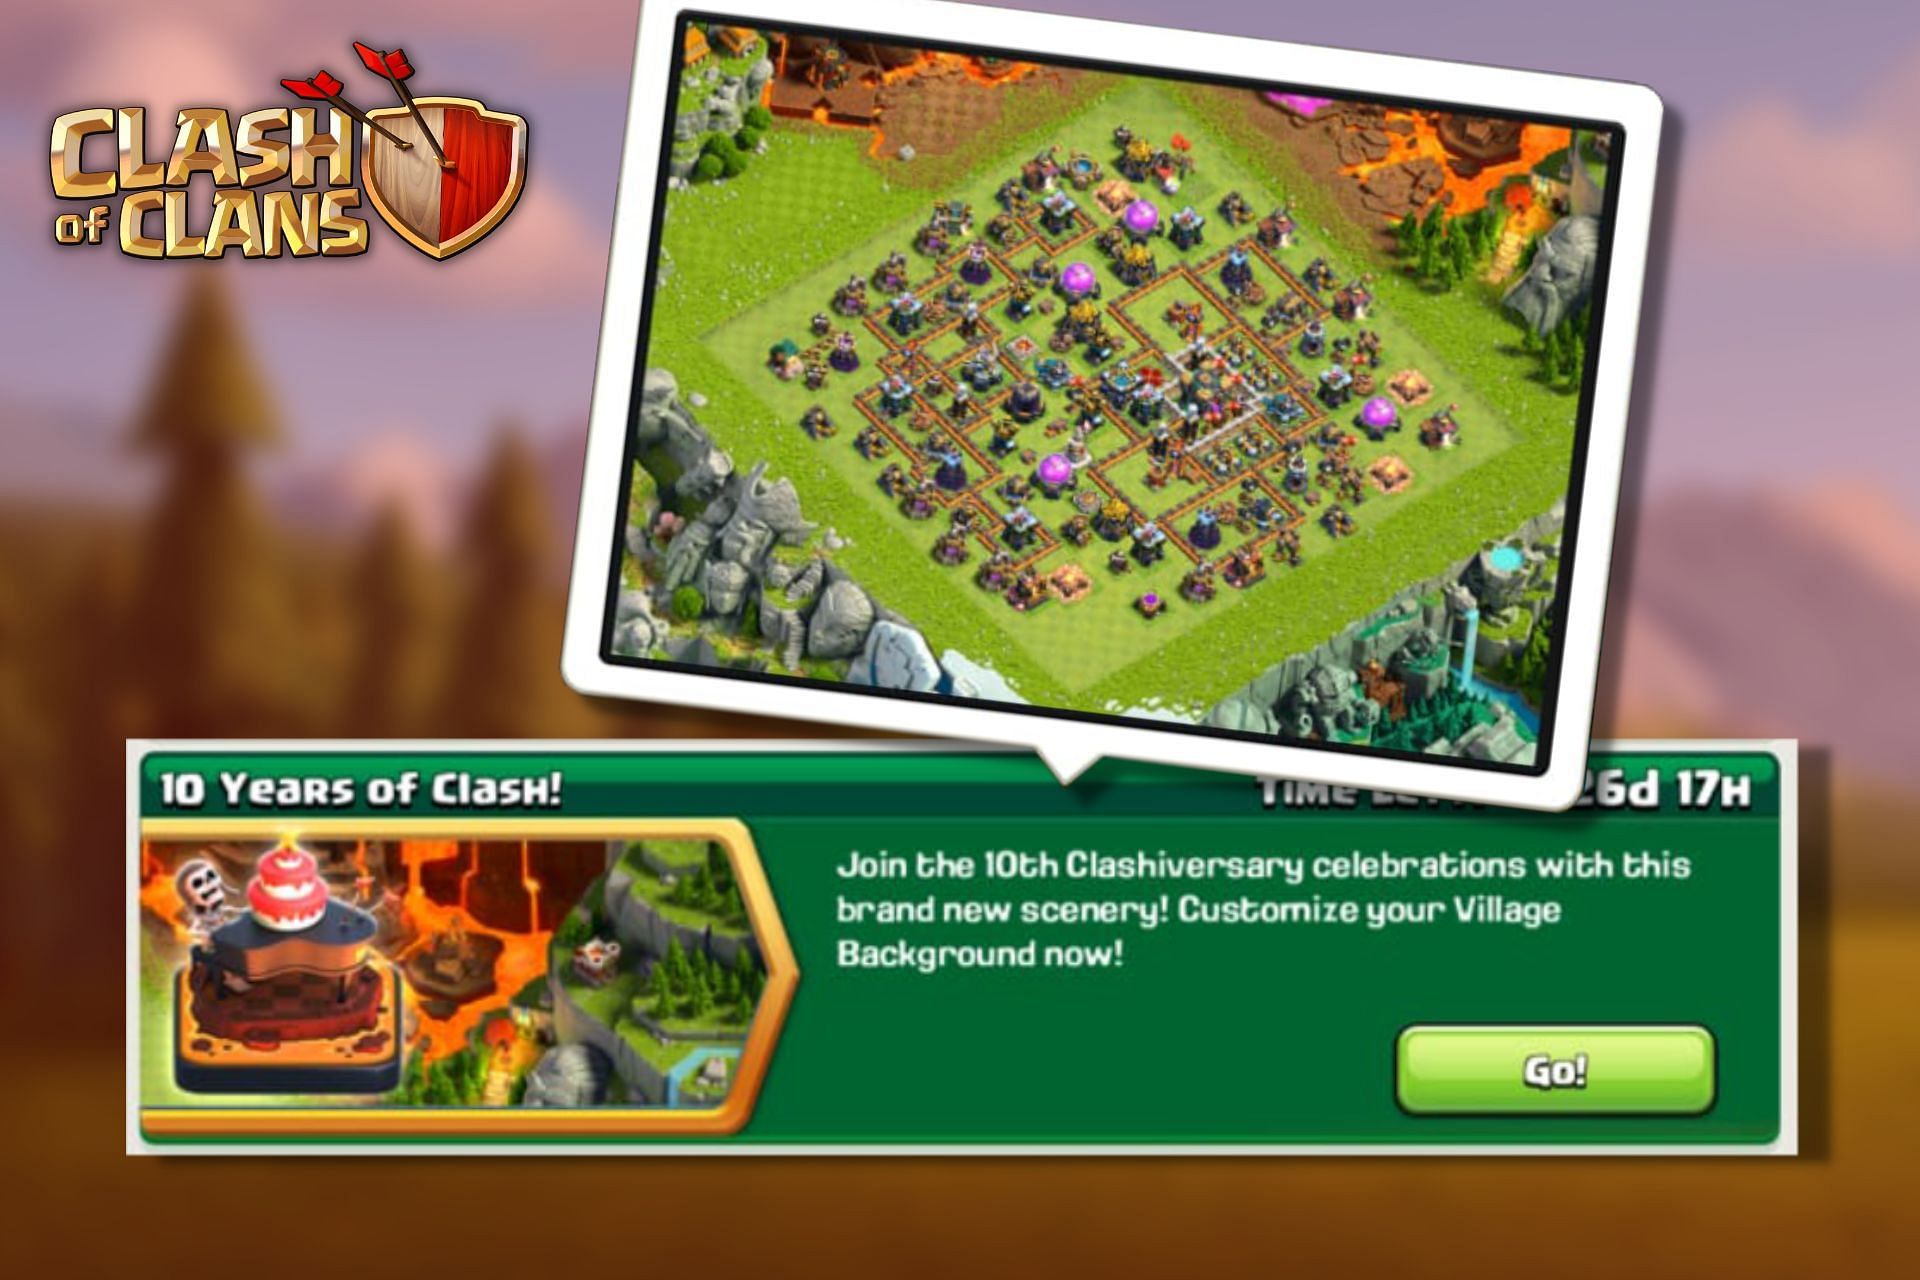 Latest Paid Scenery in Clash of Clans: 10 Years of Clash scenery